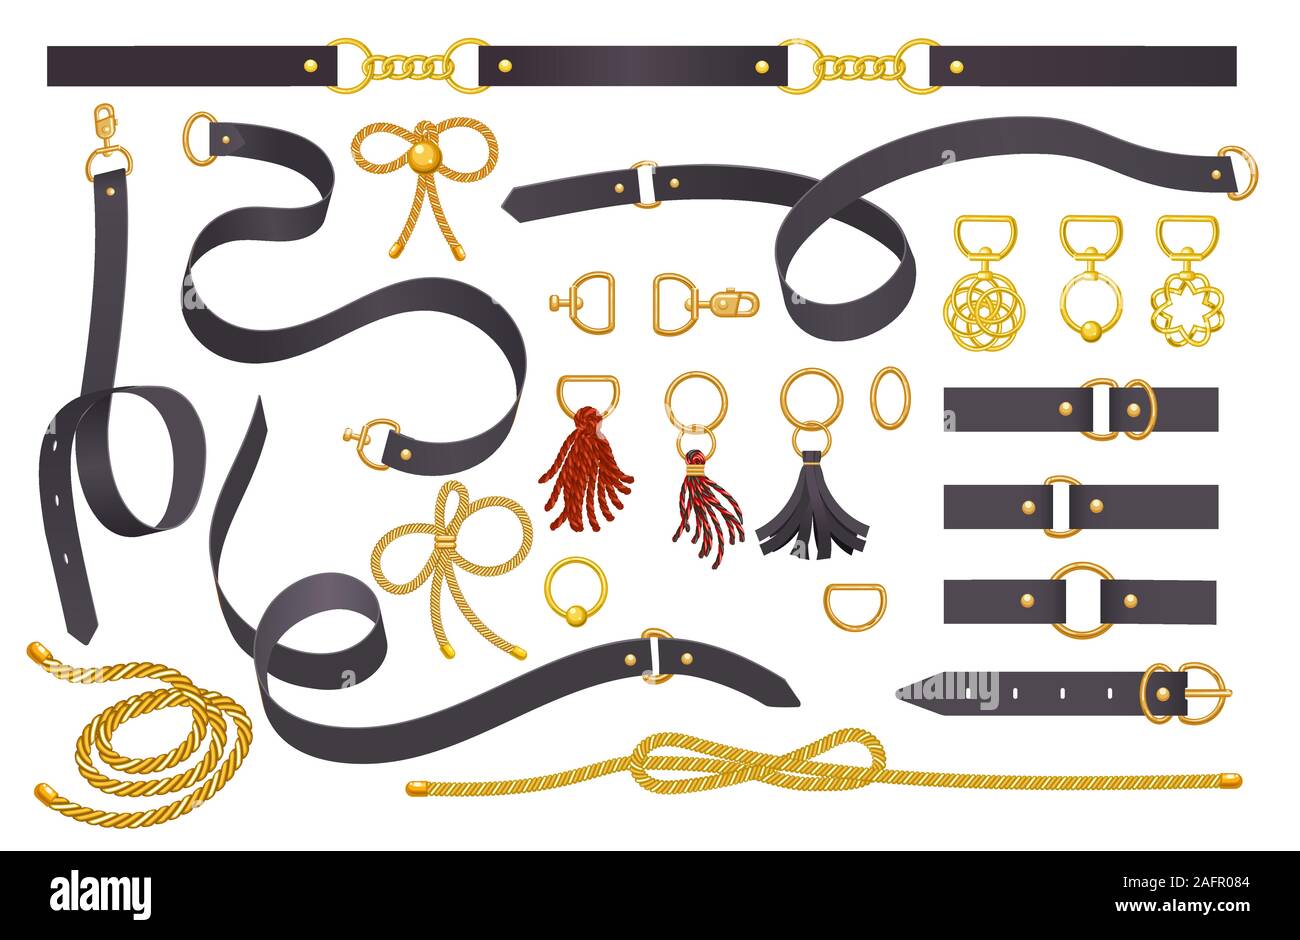 Jewelry elements for fabric design Stock Vector